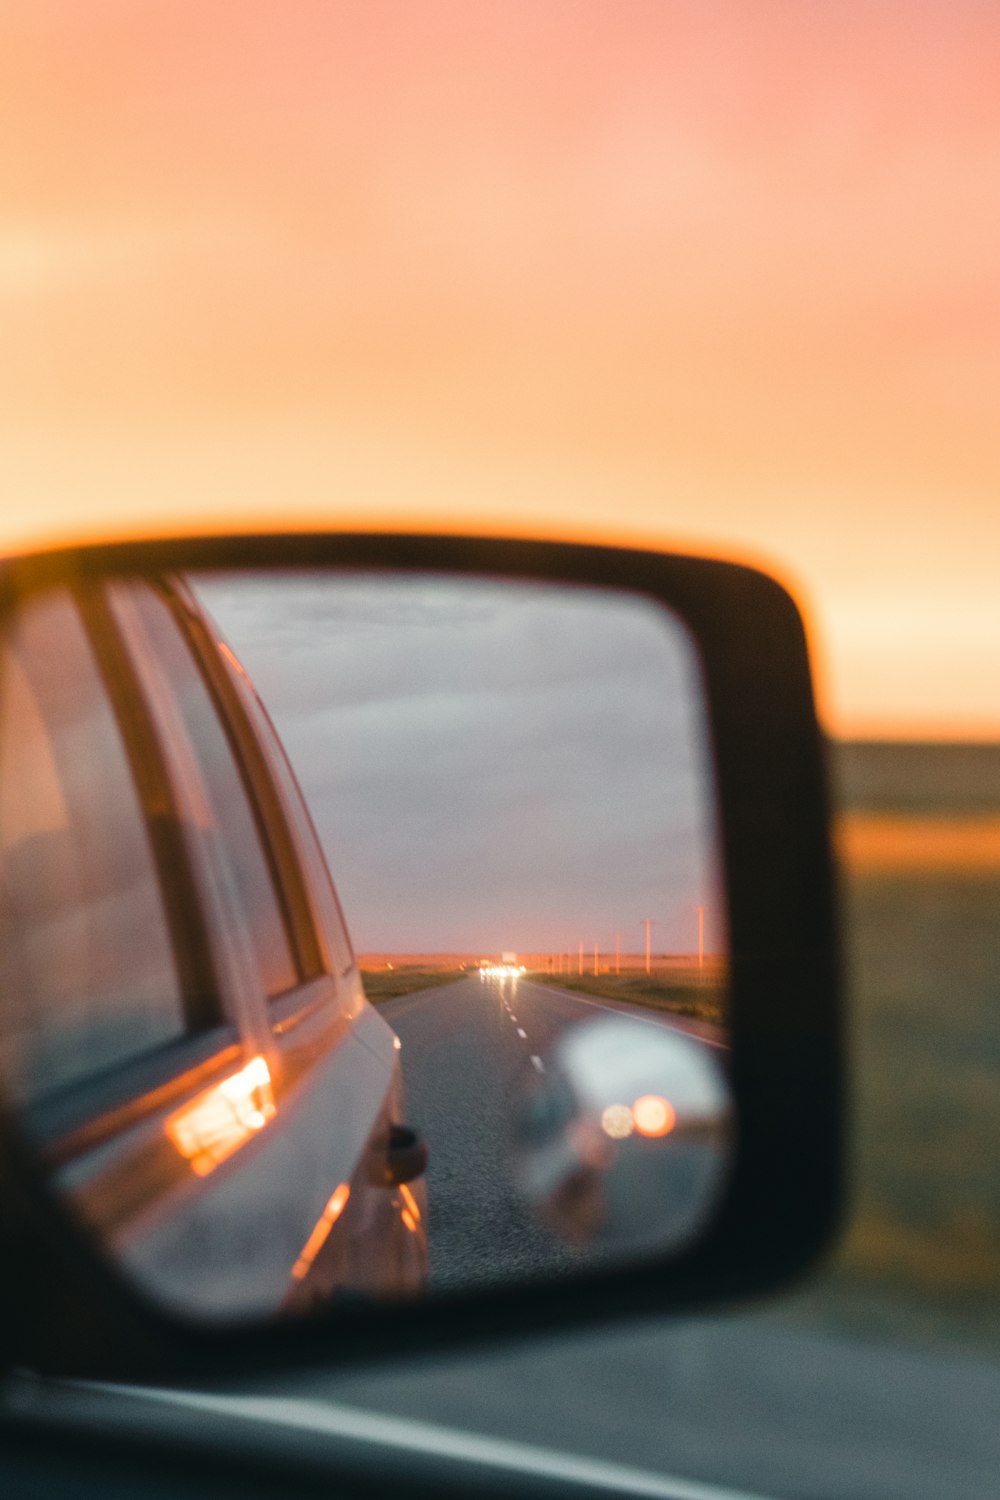 a rear view mirror on a car with a sunset in the background